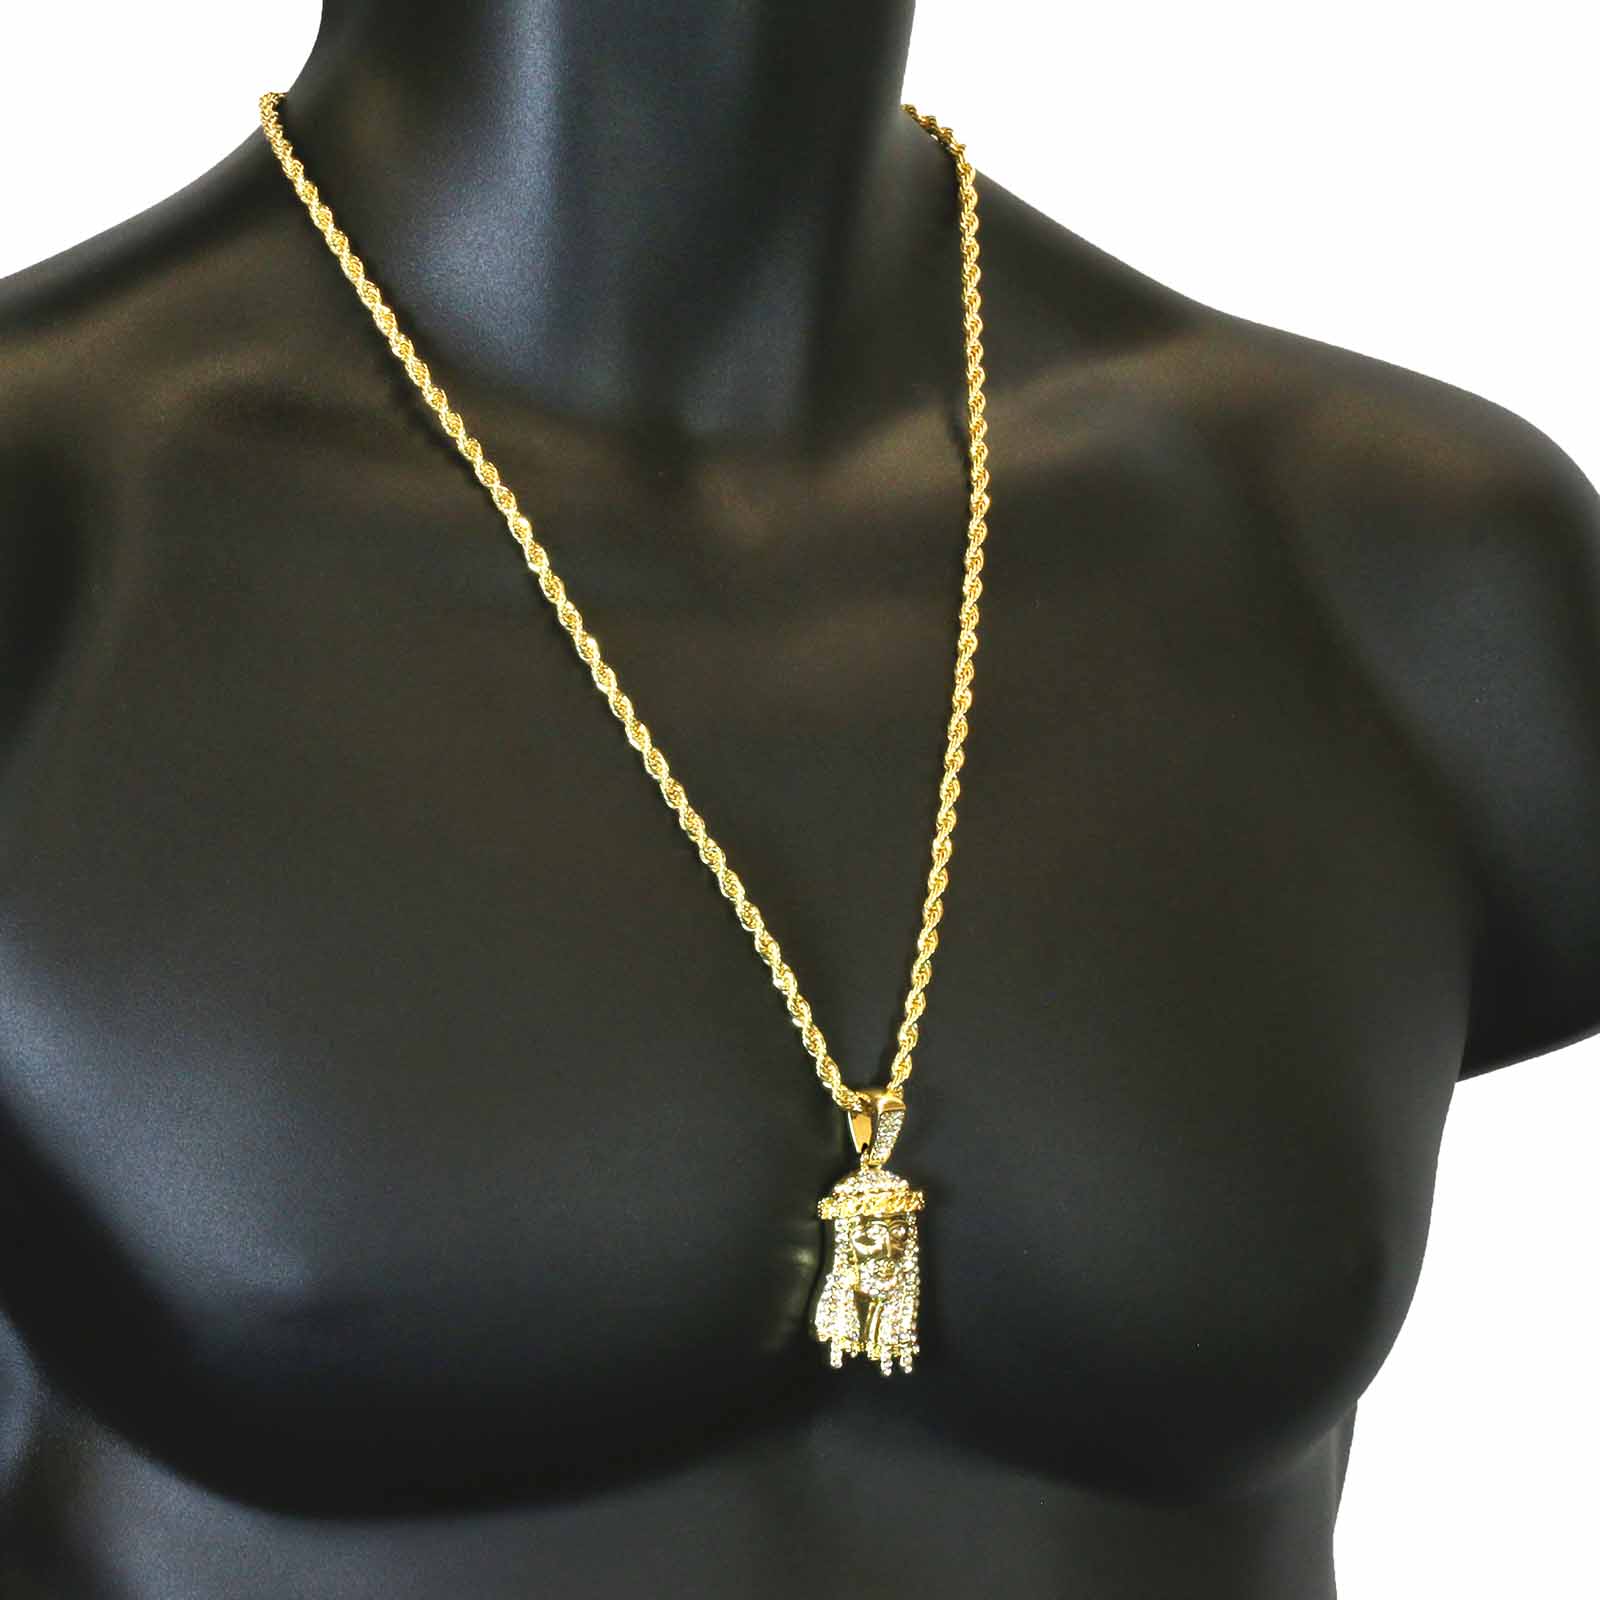 JESUS PENDANT WITH GOLD ROPE CHAIN